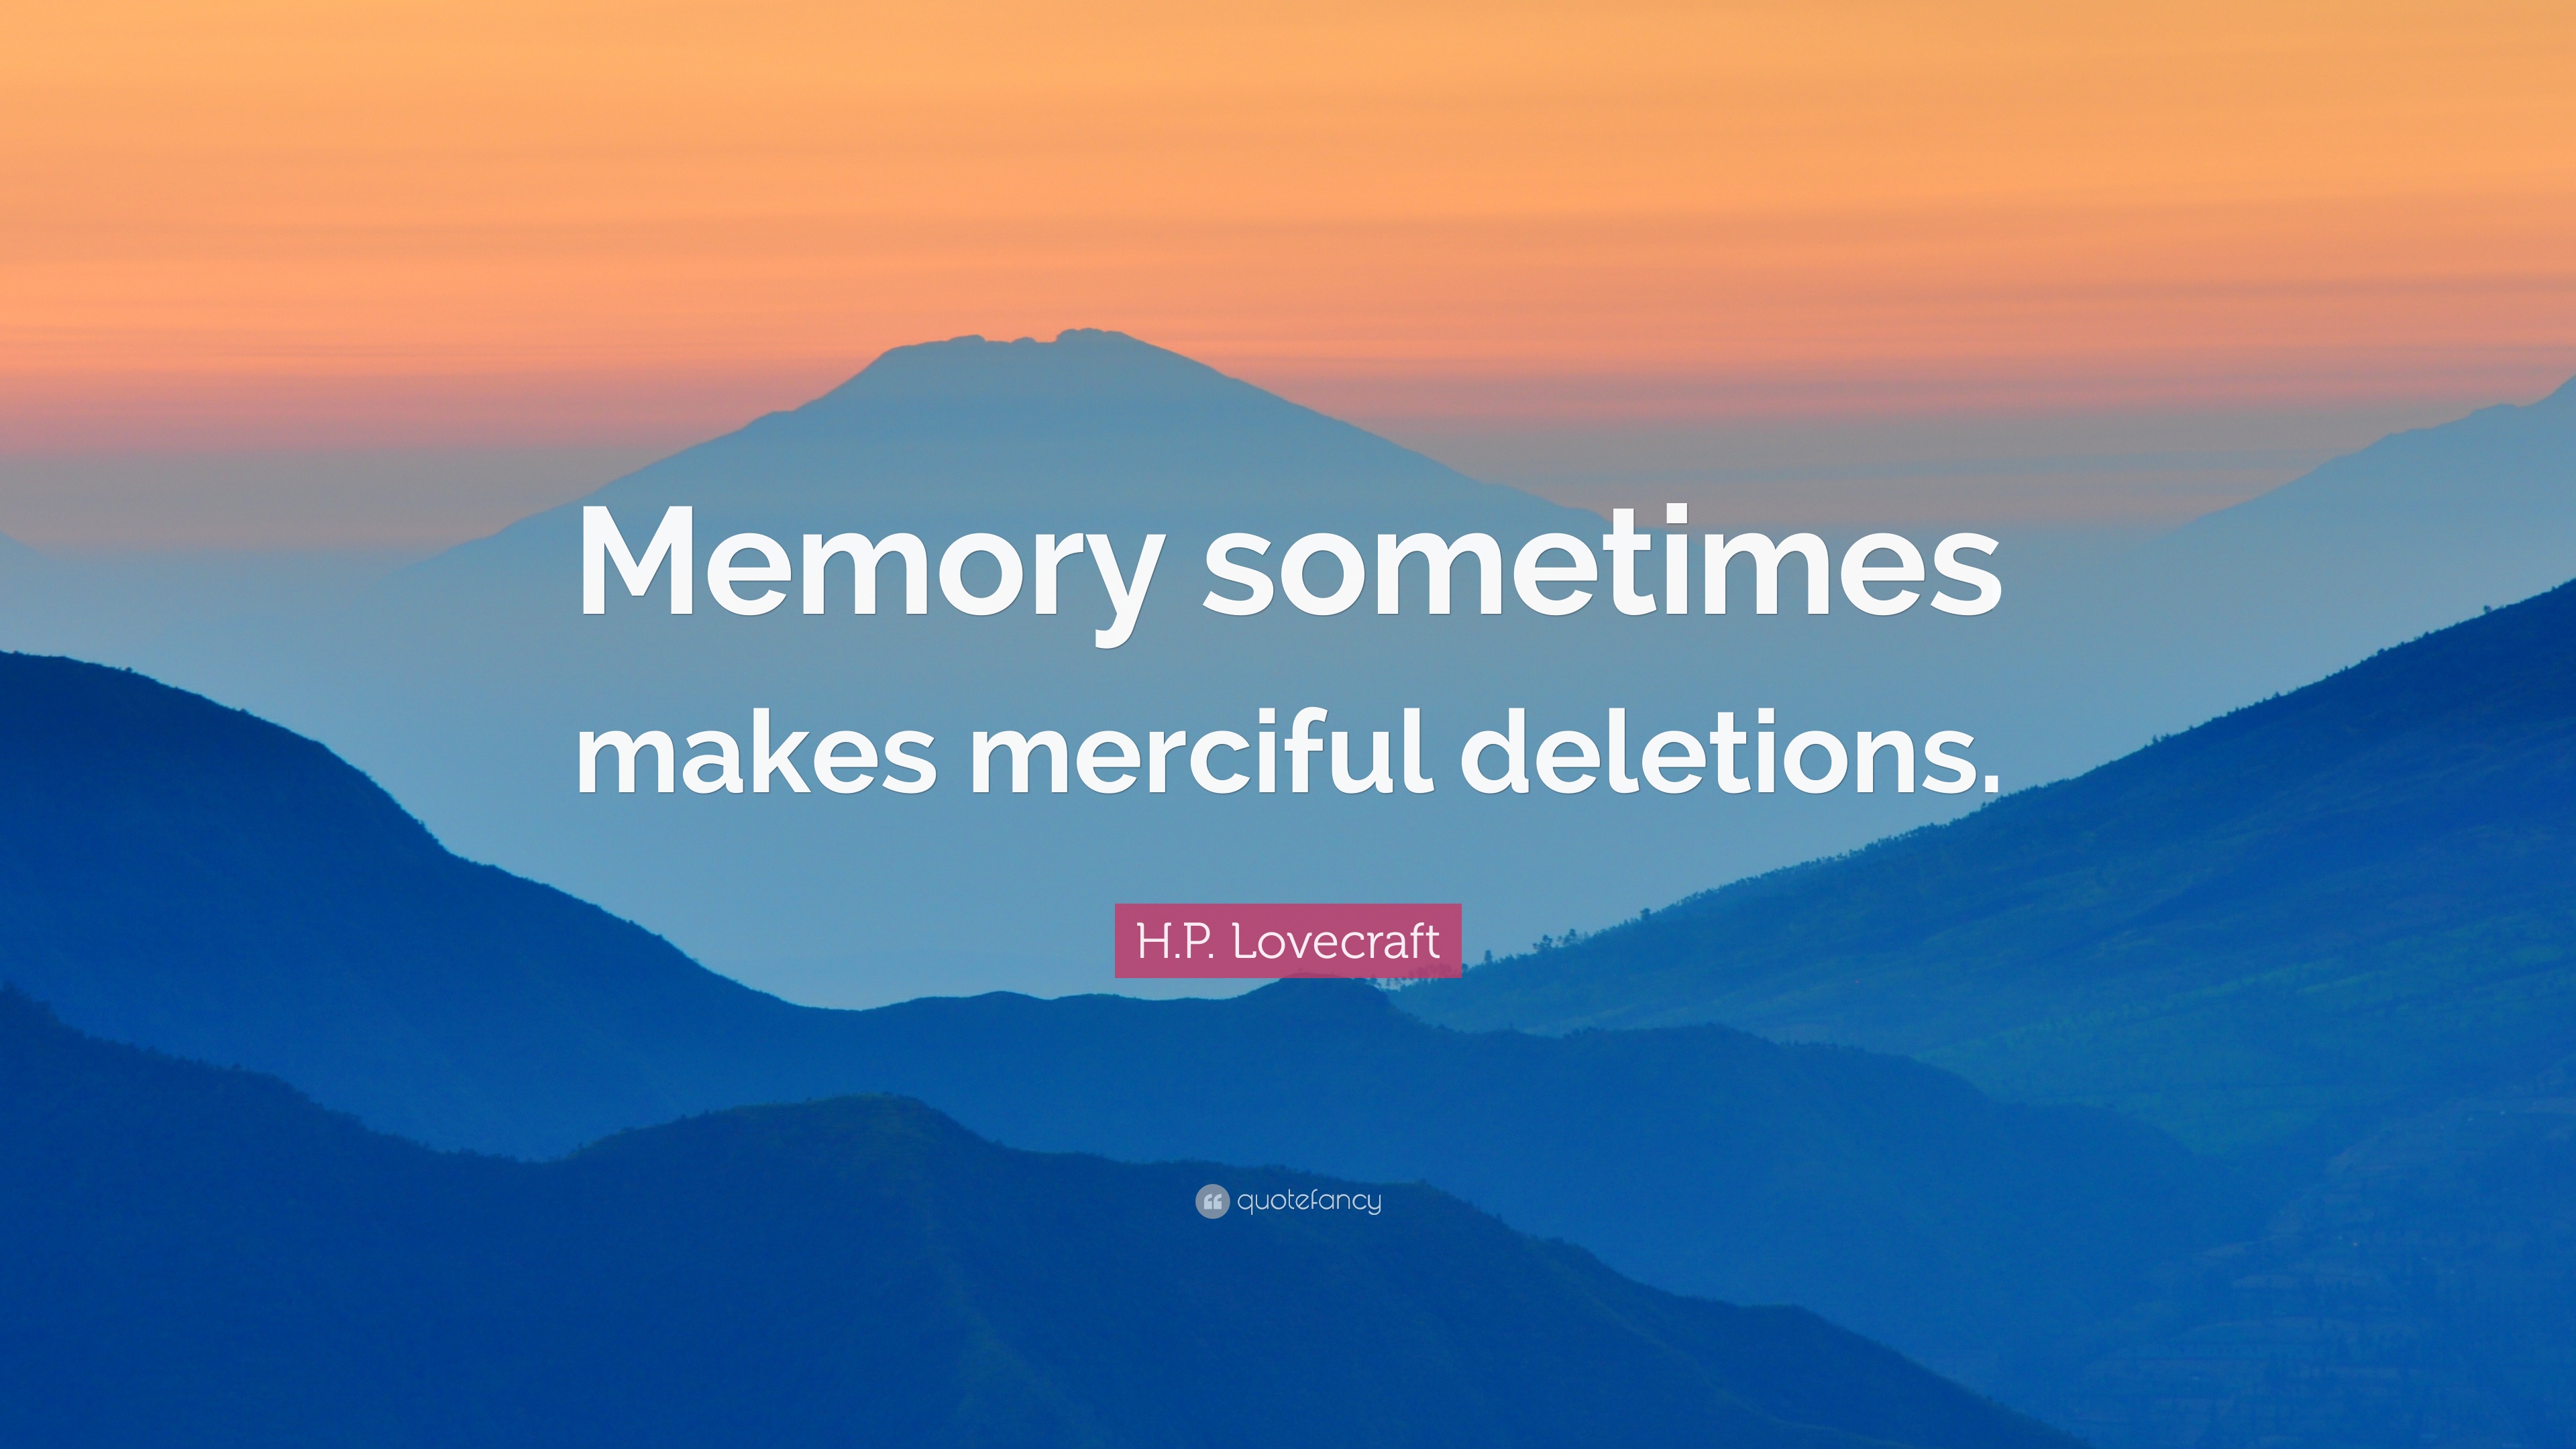 H.P. Lovecraft Quote: “Memory sometimes makes merciful